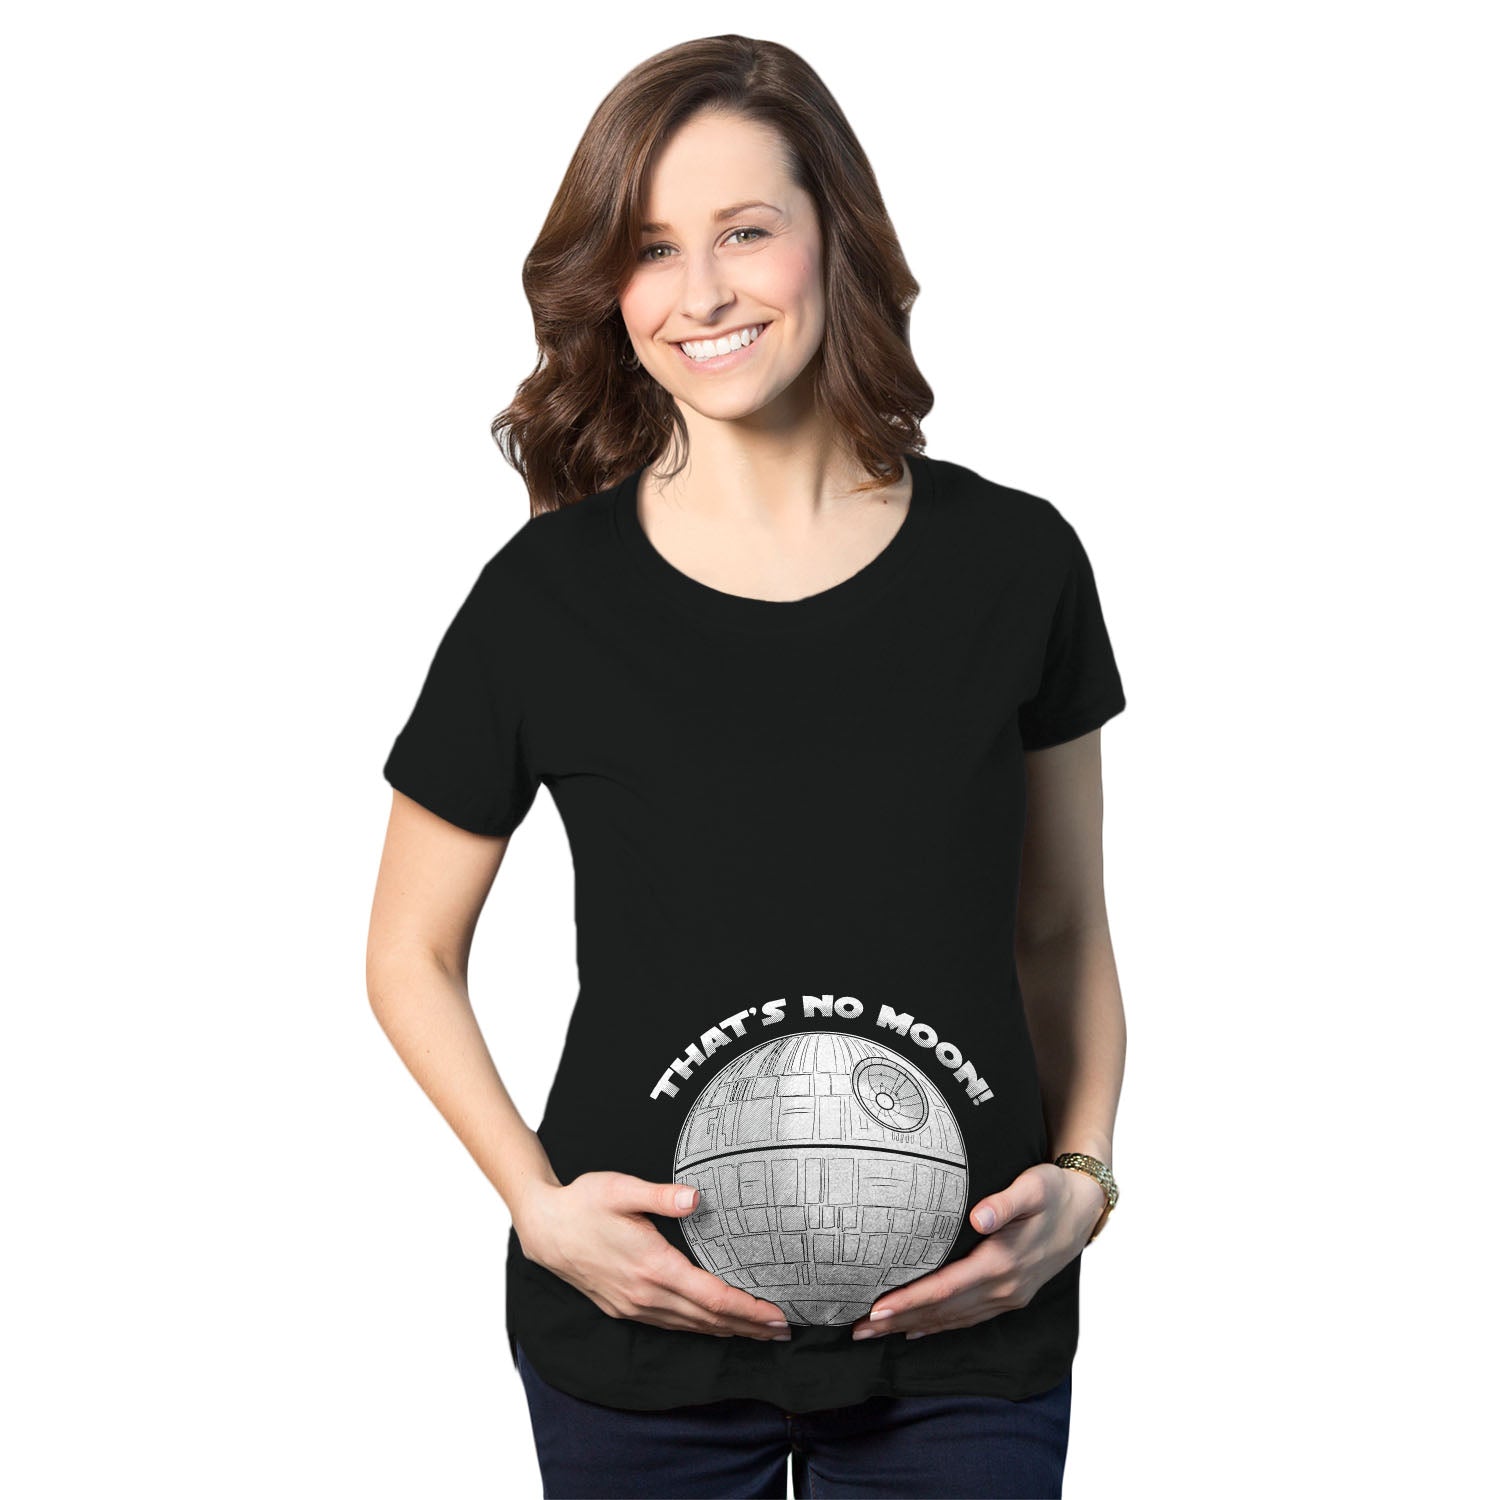 Funny That's No Moon Maternity T Shirt Nerdy TV & Movies Tee